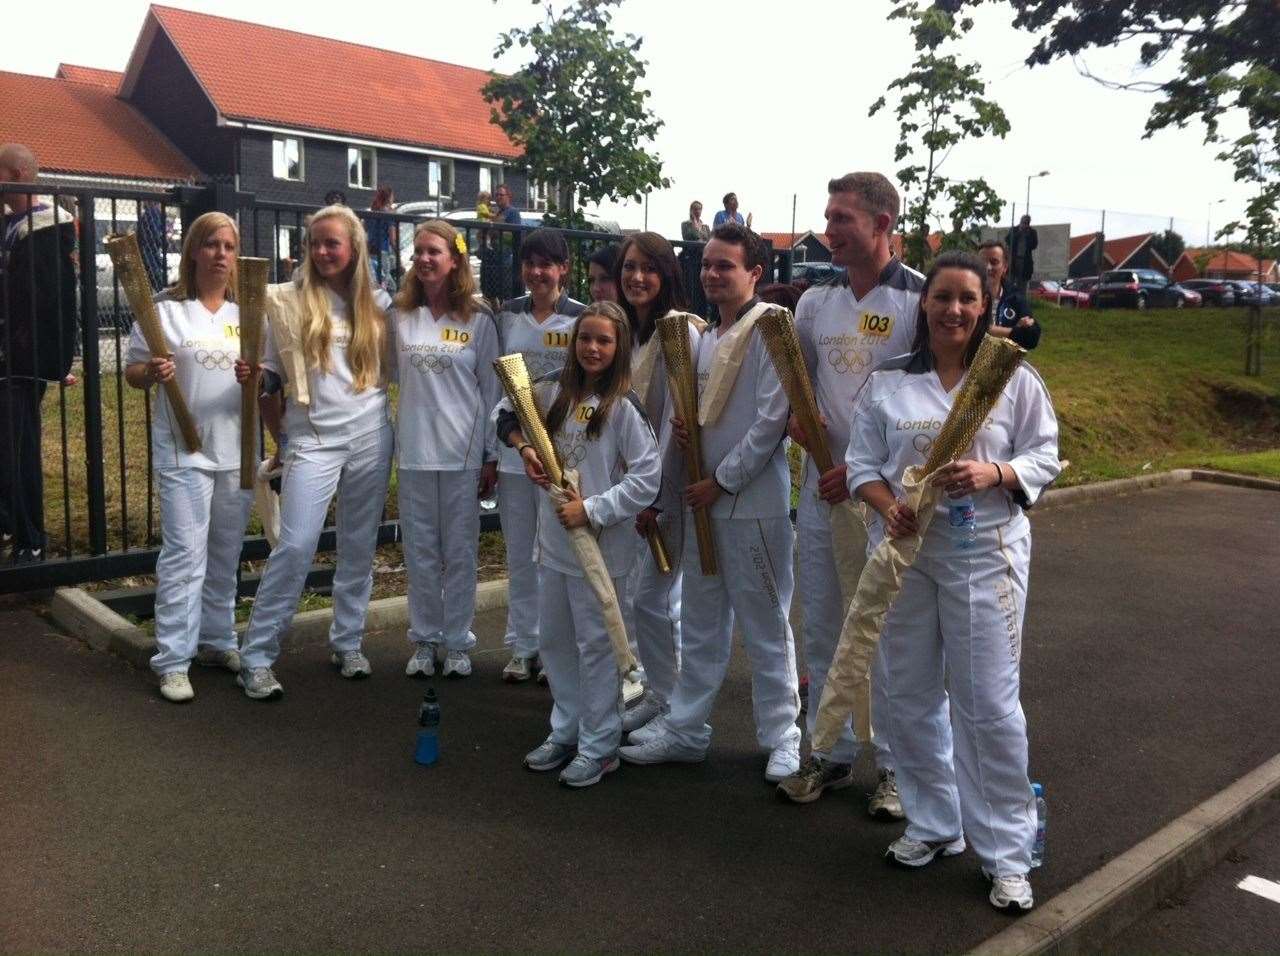 Homewood School pupil Ella Barnes (centre) with fellow Canterbury torchbearers after the relay. Pic: Joanne Barnes